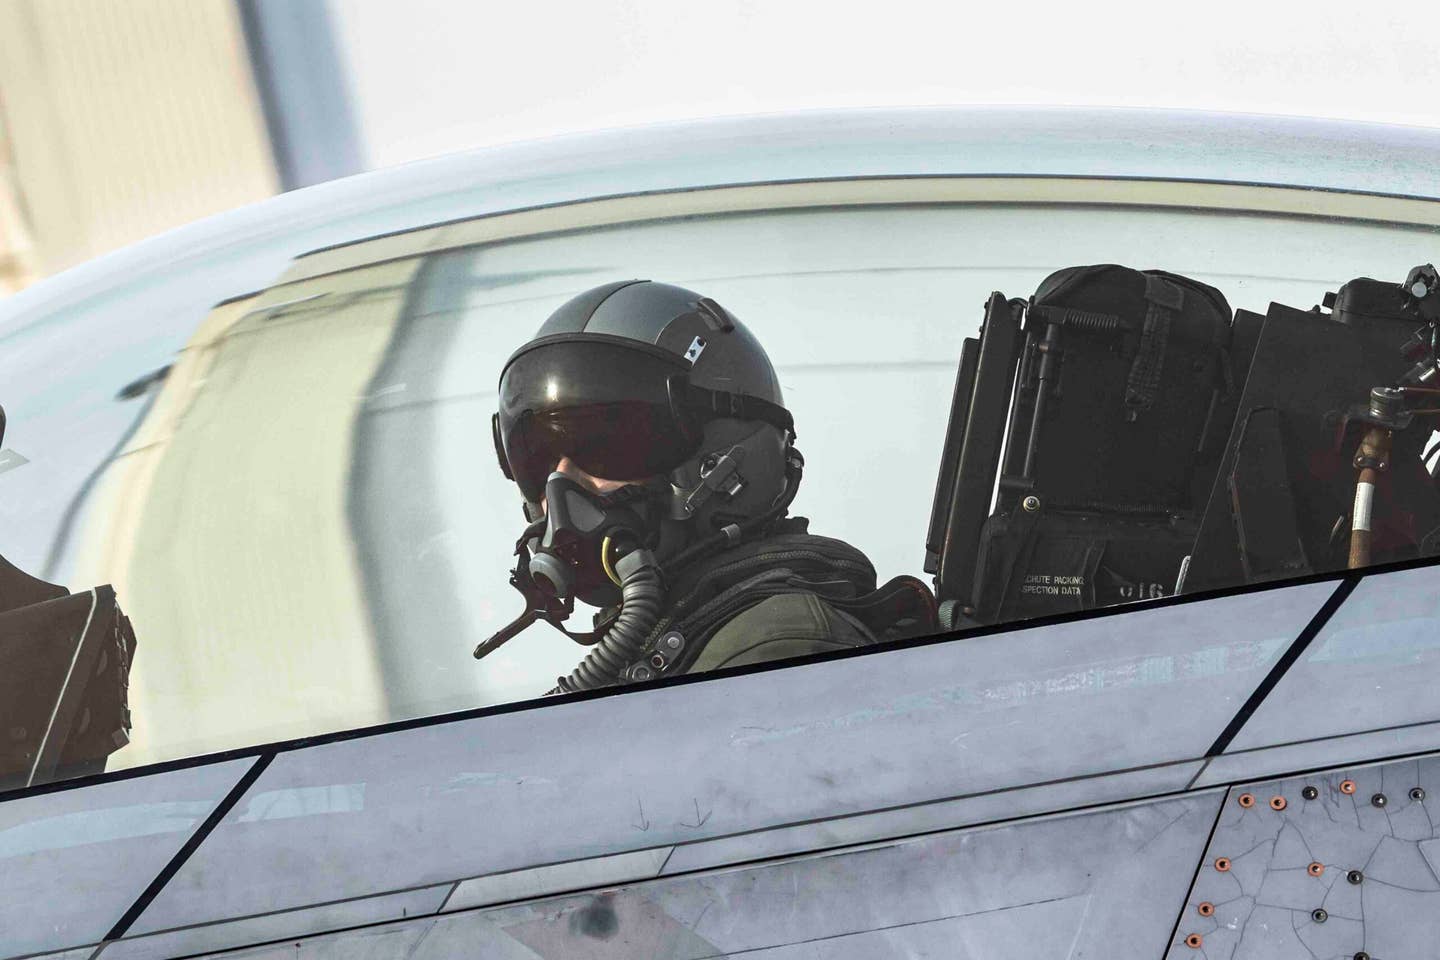 U.S. Air Force Lt. Col. Philip Johnson, a functional check flight pilot assigned to the 514th Flight Test Squadron at Hill Air Force Base, Utah, prepares to conduct the functional check flight. <em>U.S. Air Force photo by Airman 1st Class J. Michael Peña</em>